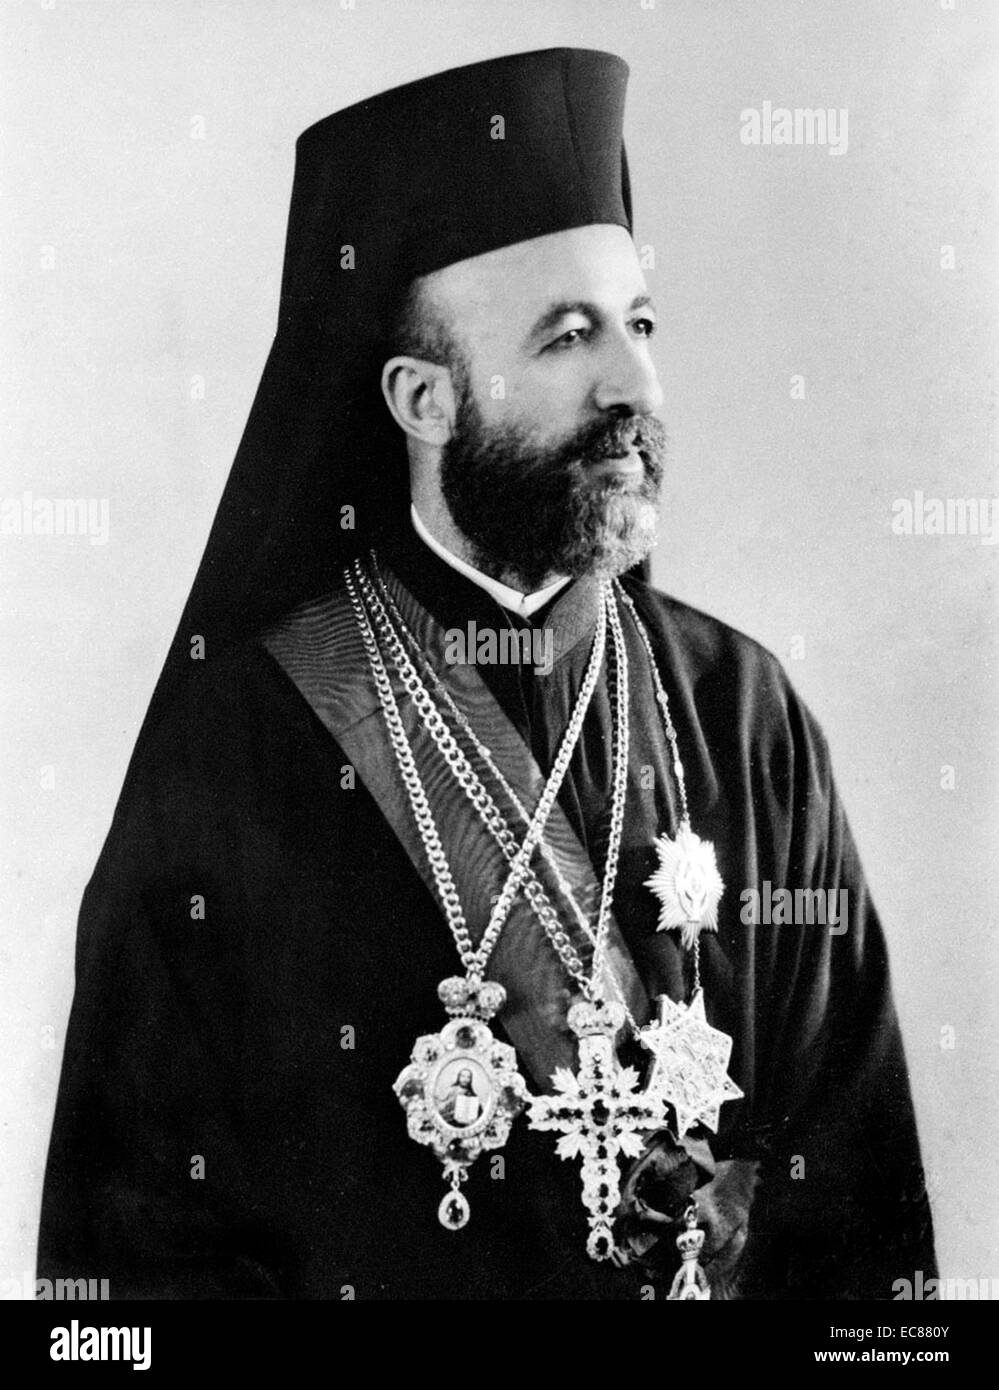 Photograph of Makarios III (1913-1977) archbishop and primate of the Orthodox Church of Cyprus and the first President of the Republic of Cyprus. Dated 1970 Stock Photo